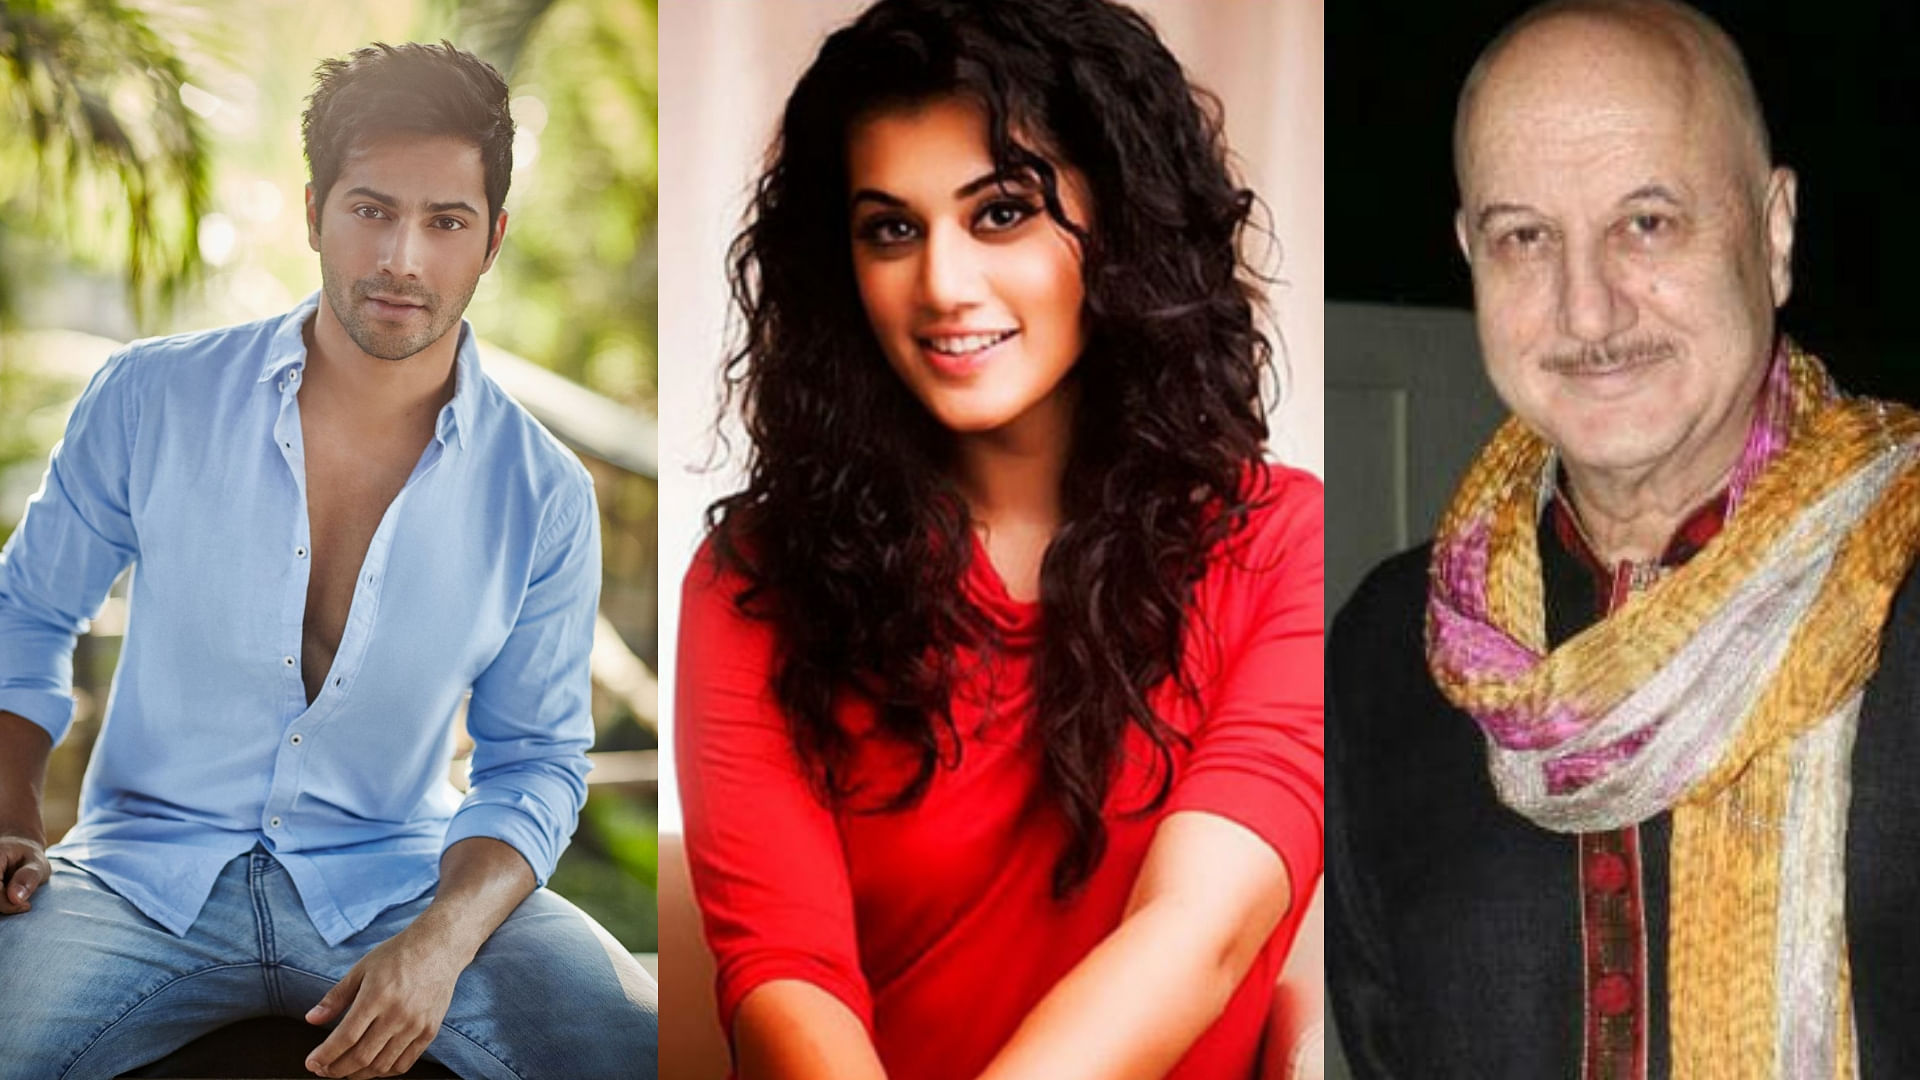 On the occasion of Gandhi Jayanti on Tuesday, Hindi film celebrities like Anupam Kher, Taapsee Pannu and Varun Dhawan spoke of the impact of the Father of the Nation, and reiterated some of his words of wisdom.